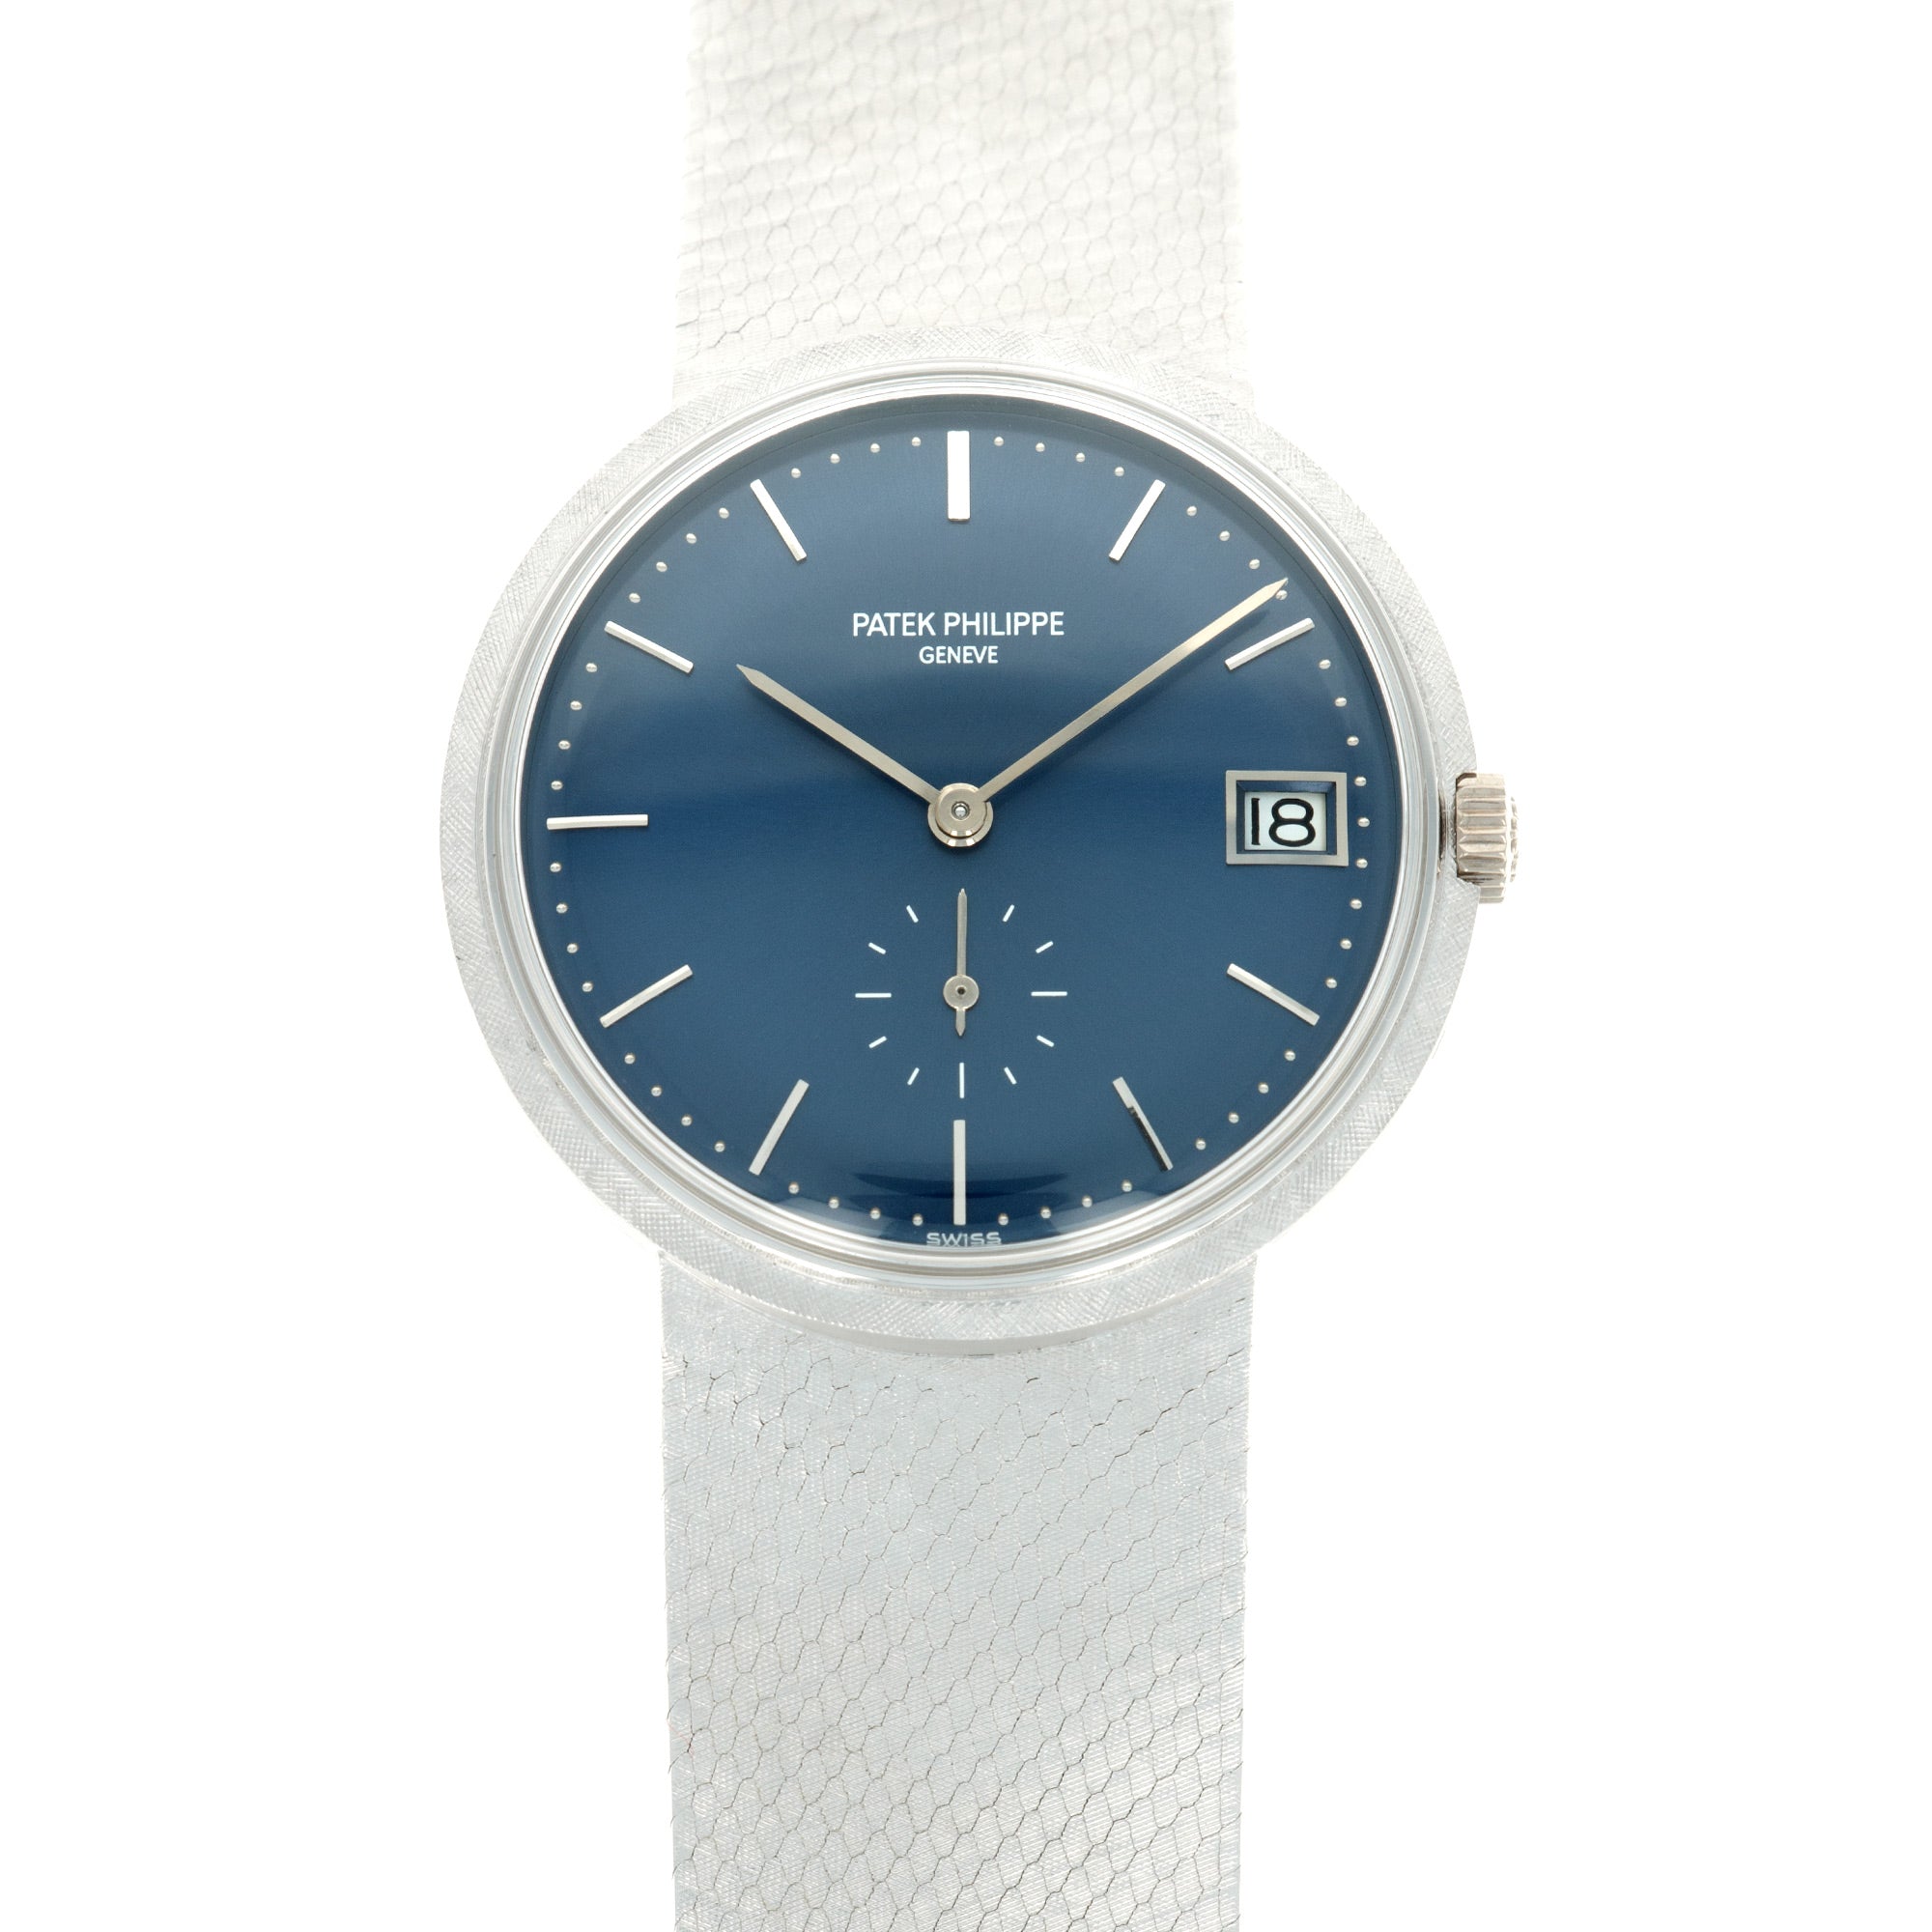 Patek Philippe - Patek Philippe White Gold with blue dial Ref. 3445/6 - The Keystone Watches